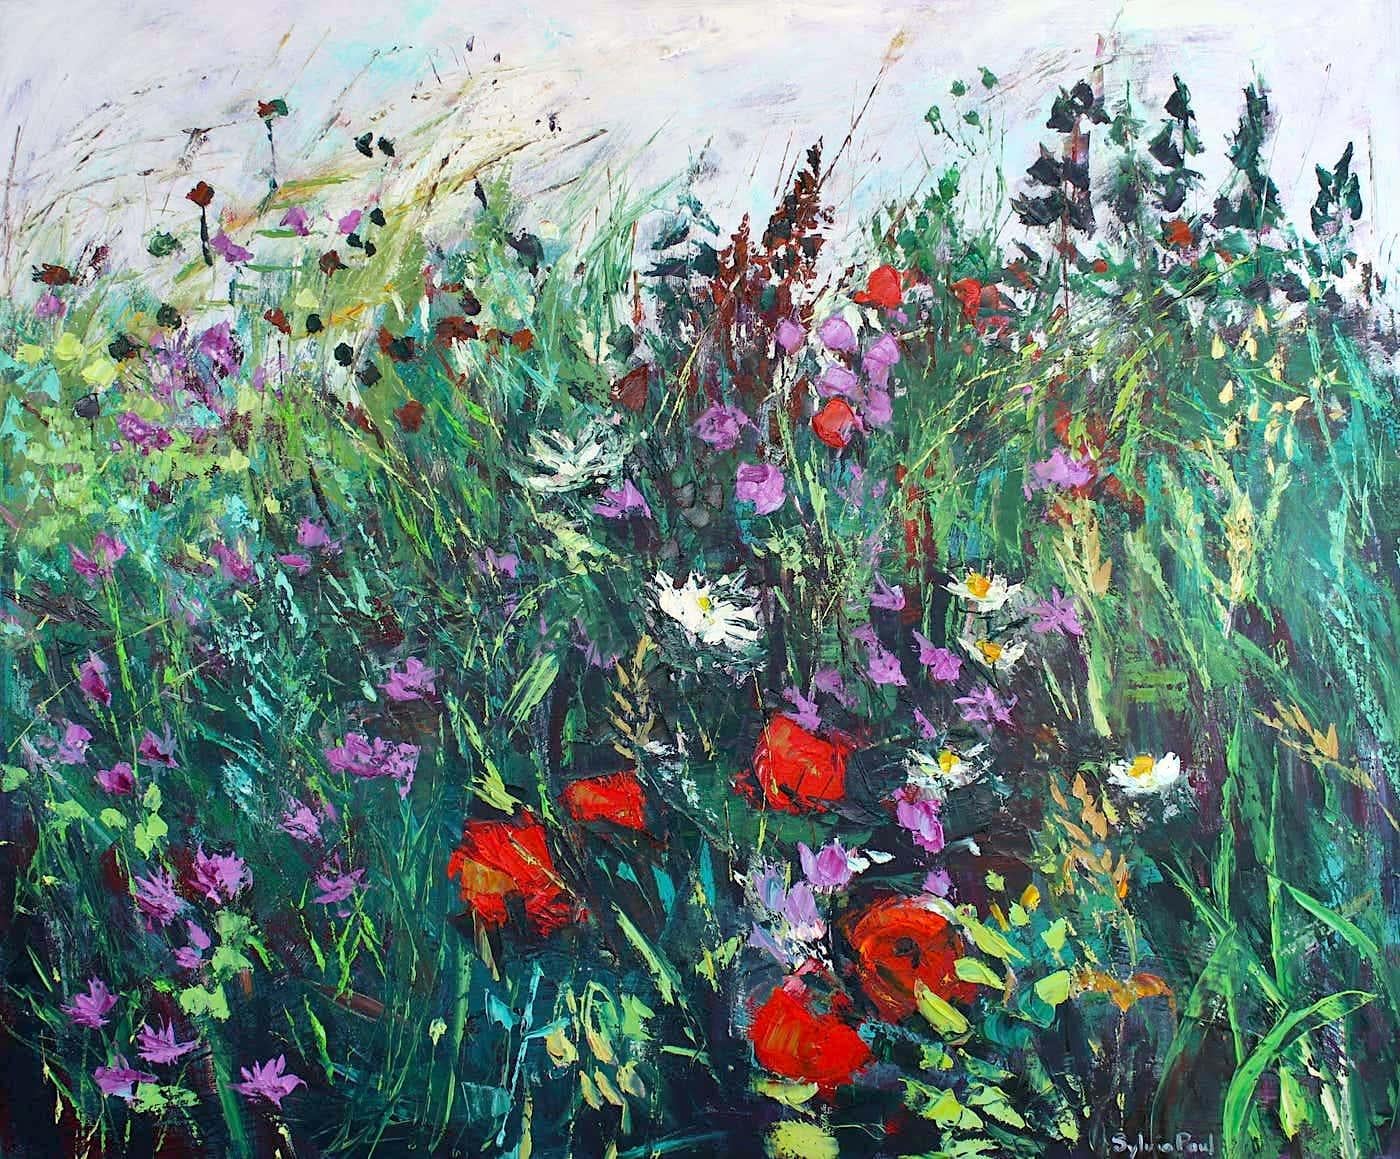 Wild Flower Meadow-original abstract floral landscape painting-contemporary art